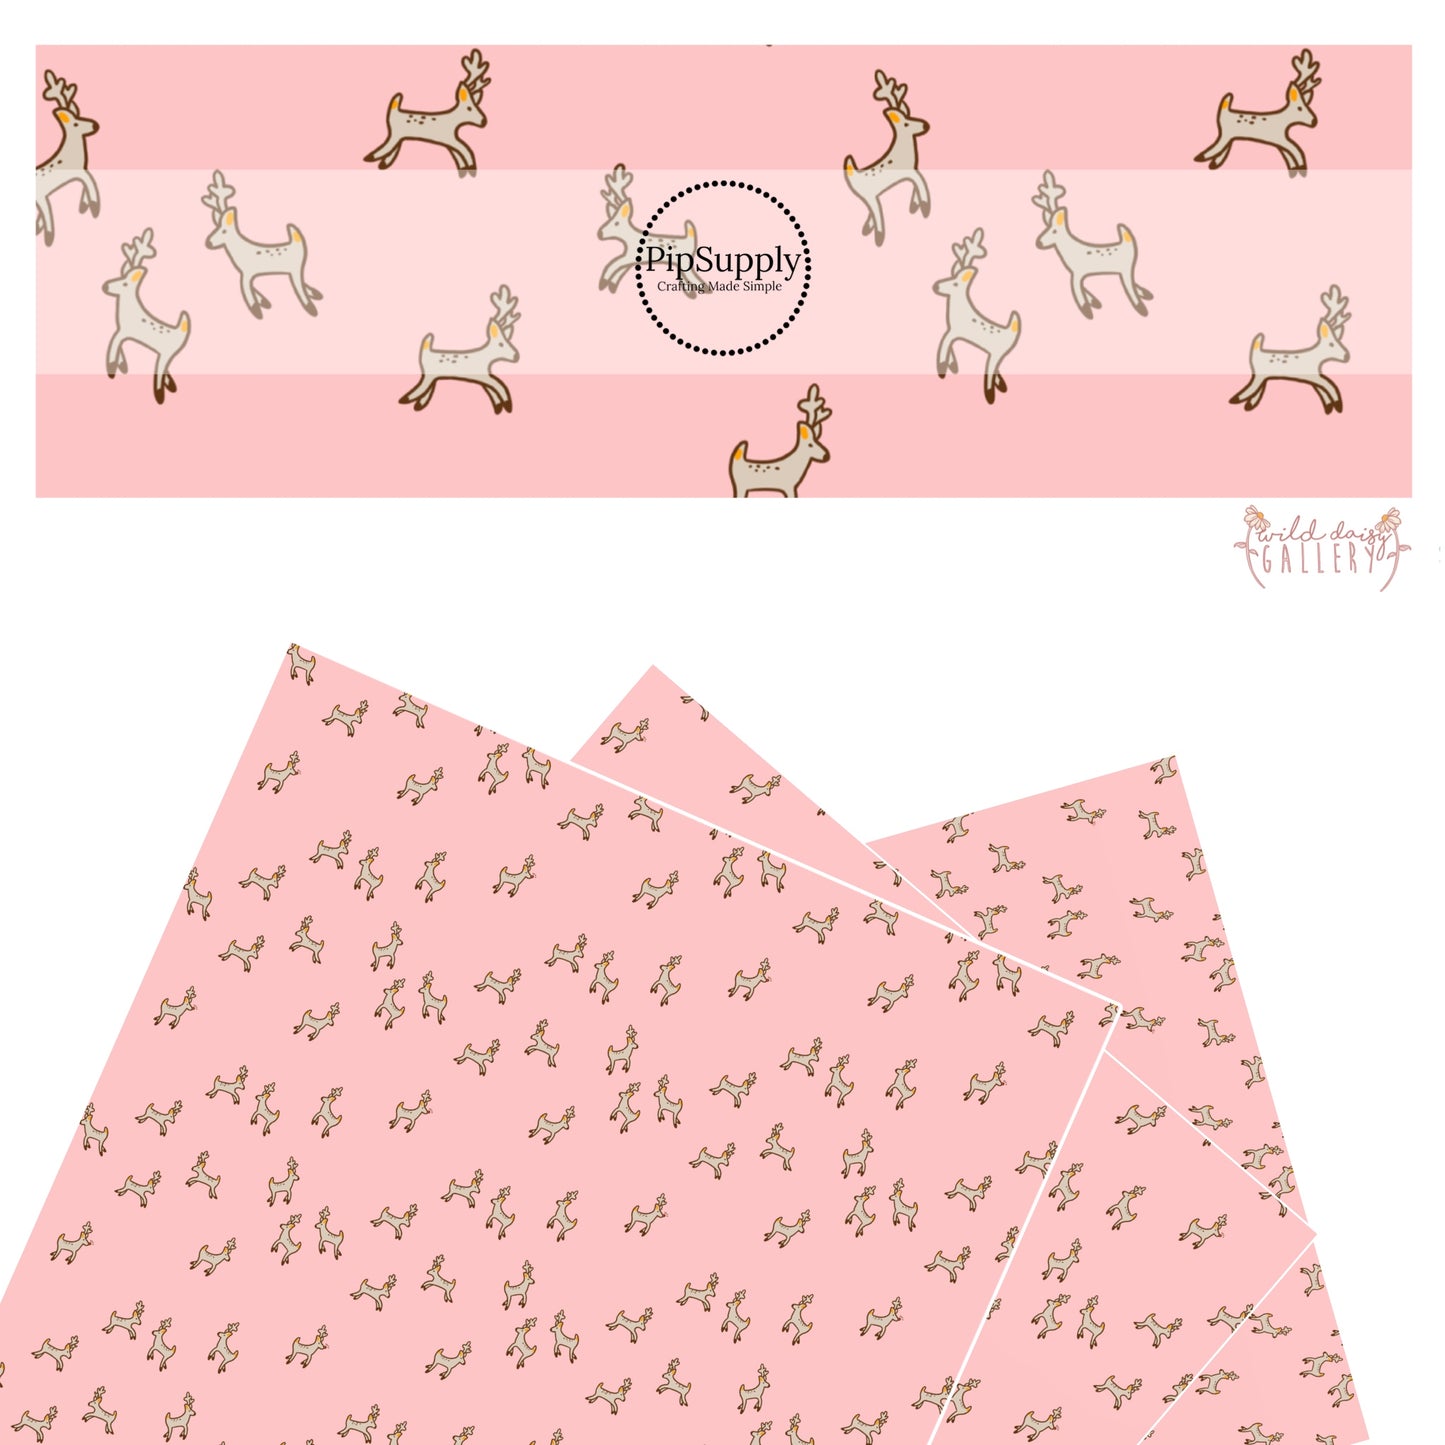 Jumping brown reindeer on pink faux leather sheets